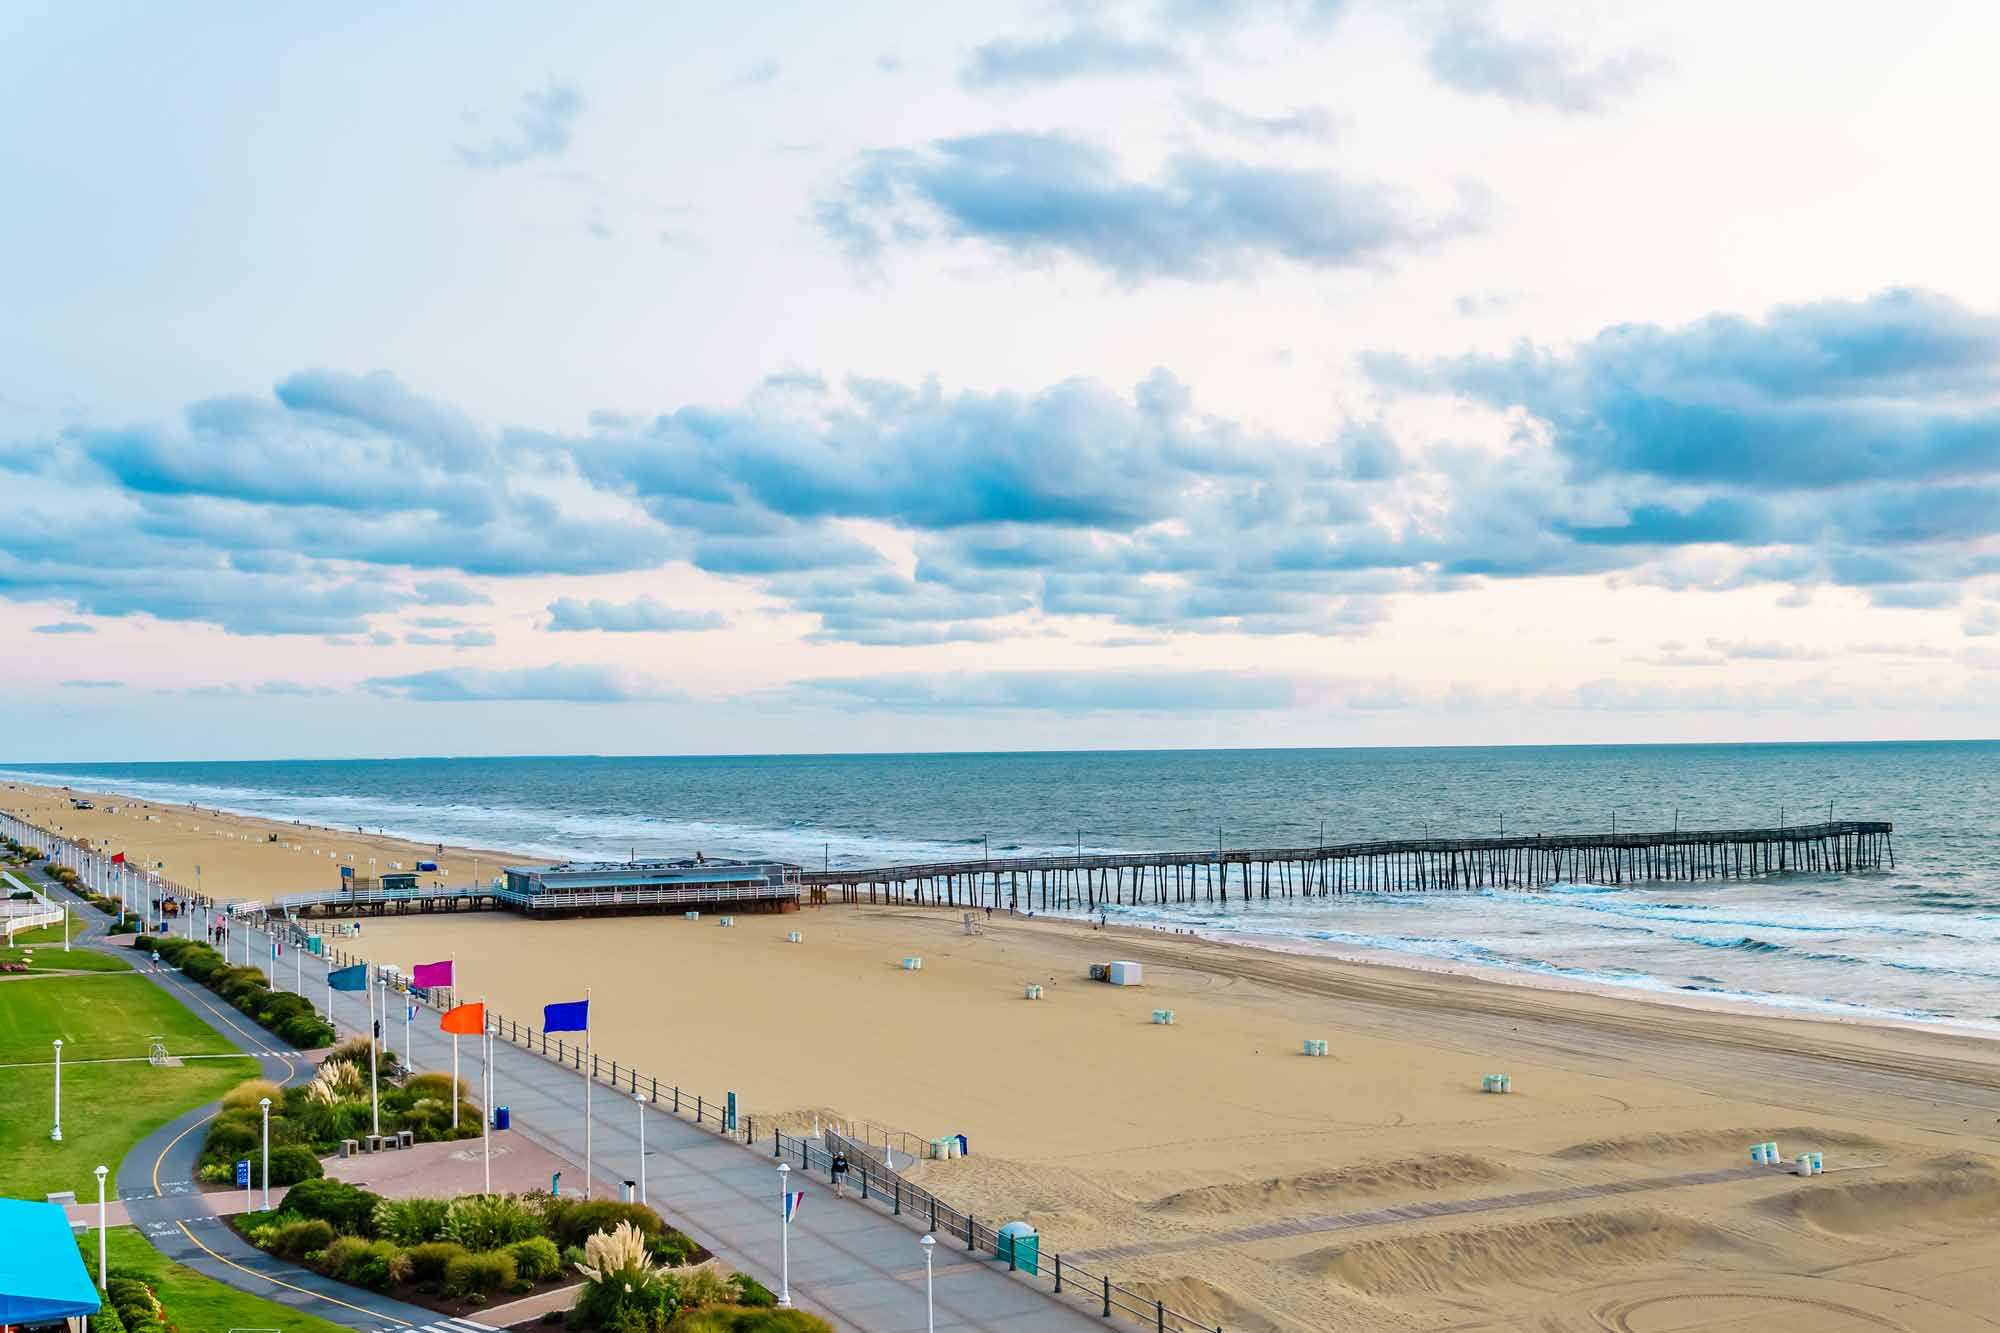 A picturesque view of Virginia Beach showing a wide sandy beach, a long pier, and a promenade under a cloudy sky